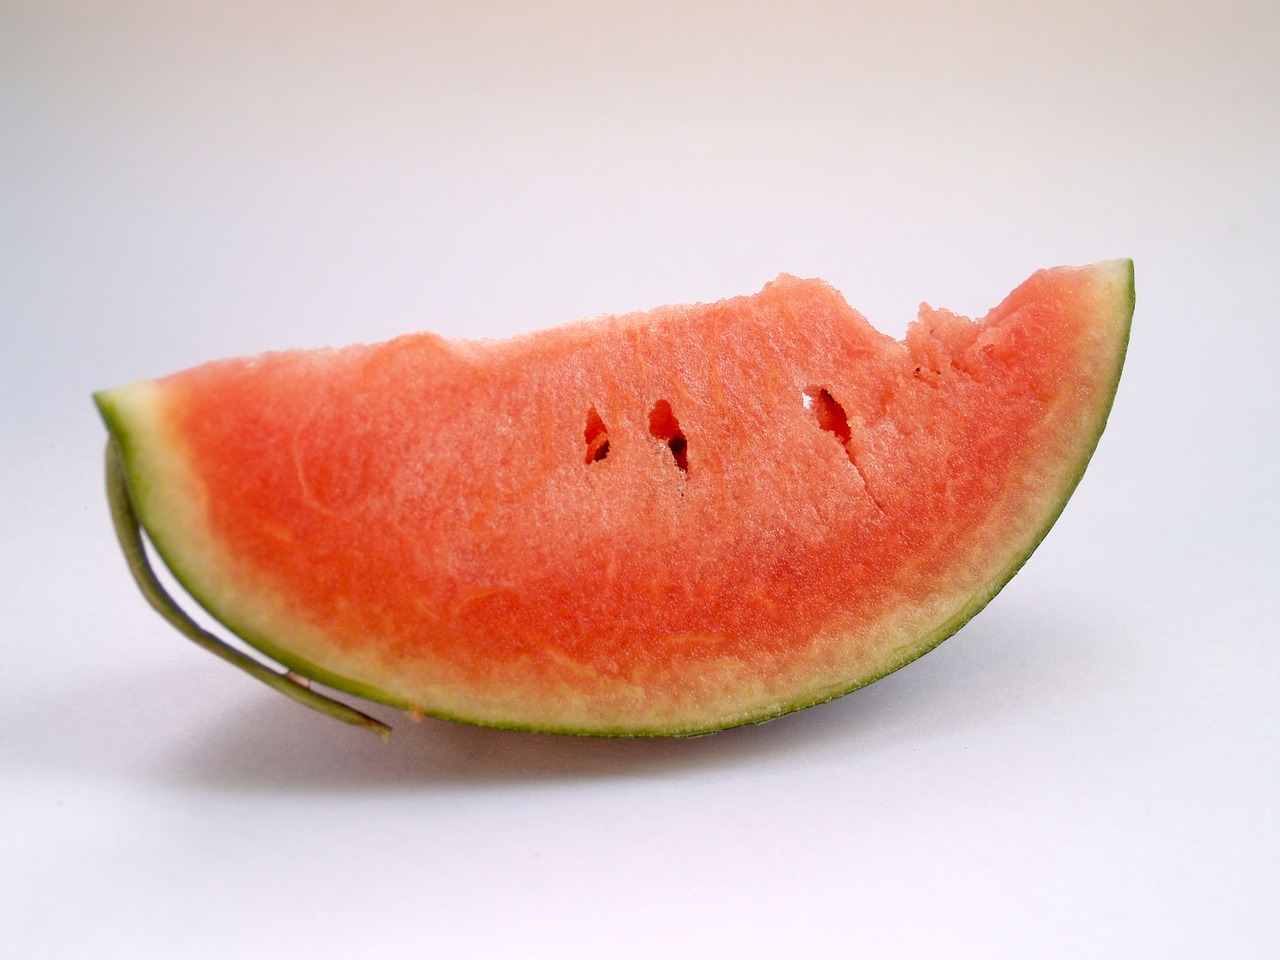 Image - watermelon slice isolated seeded